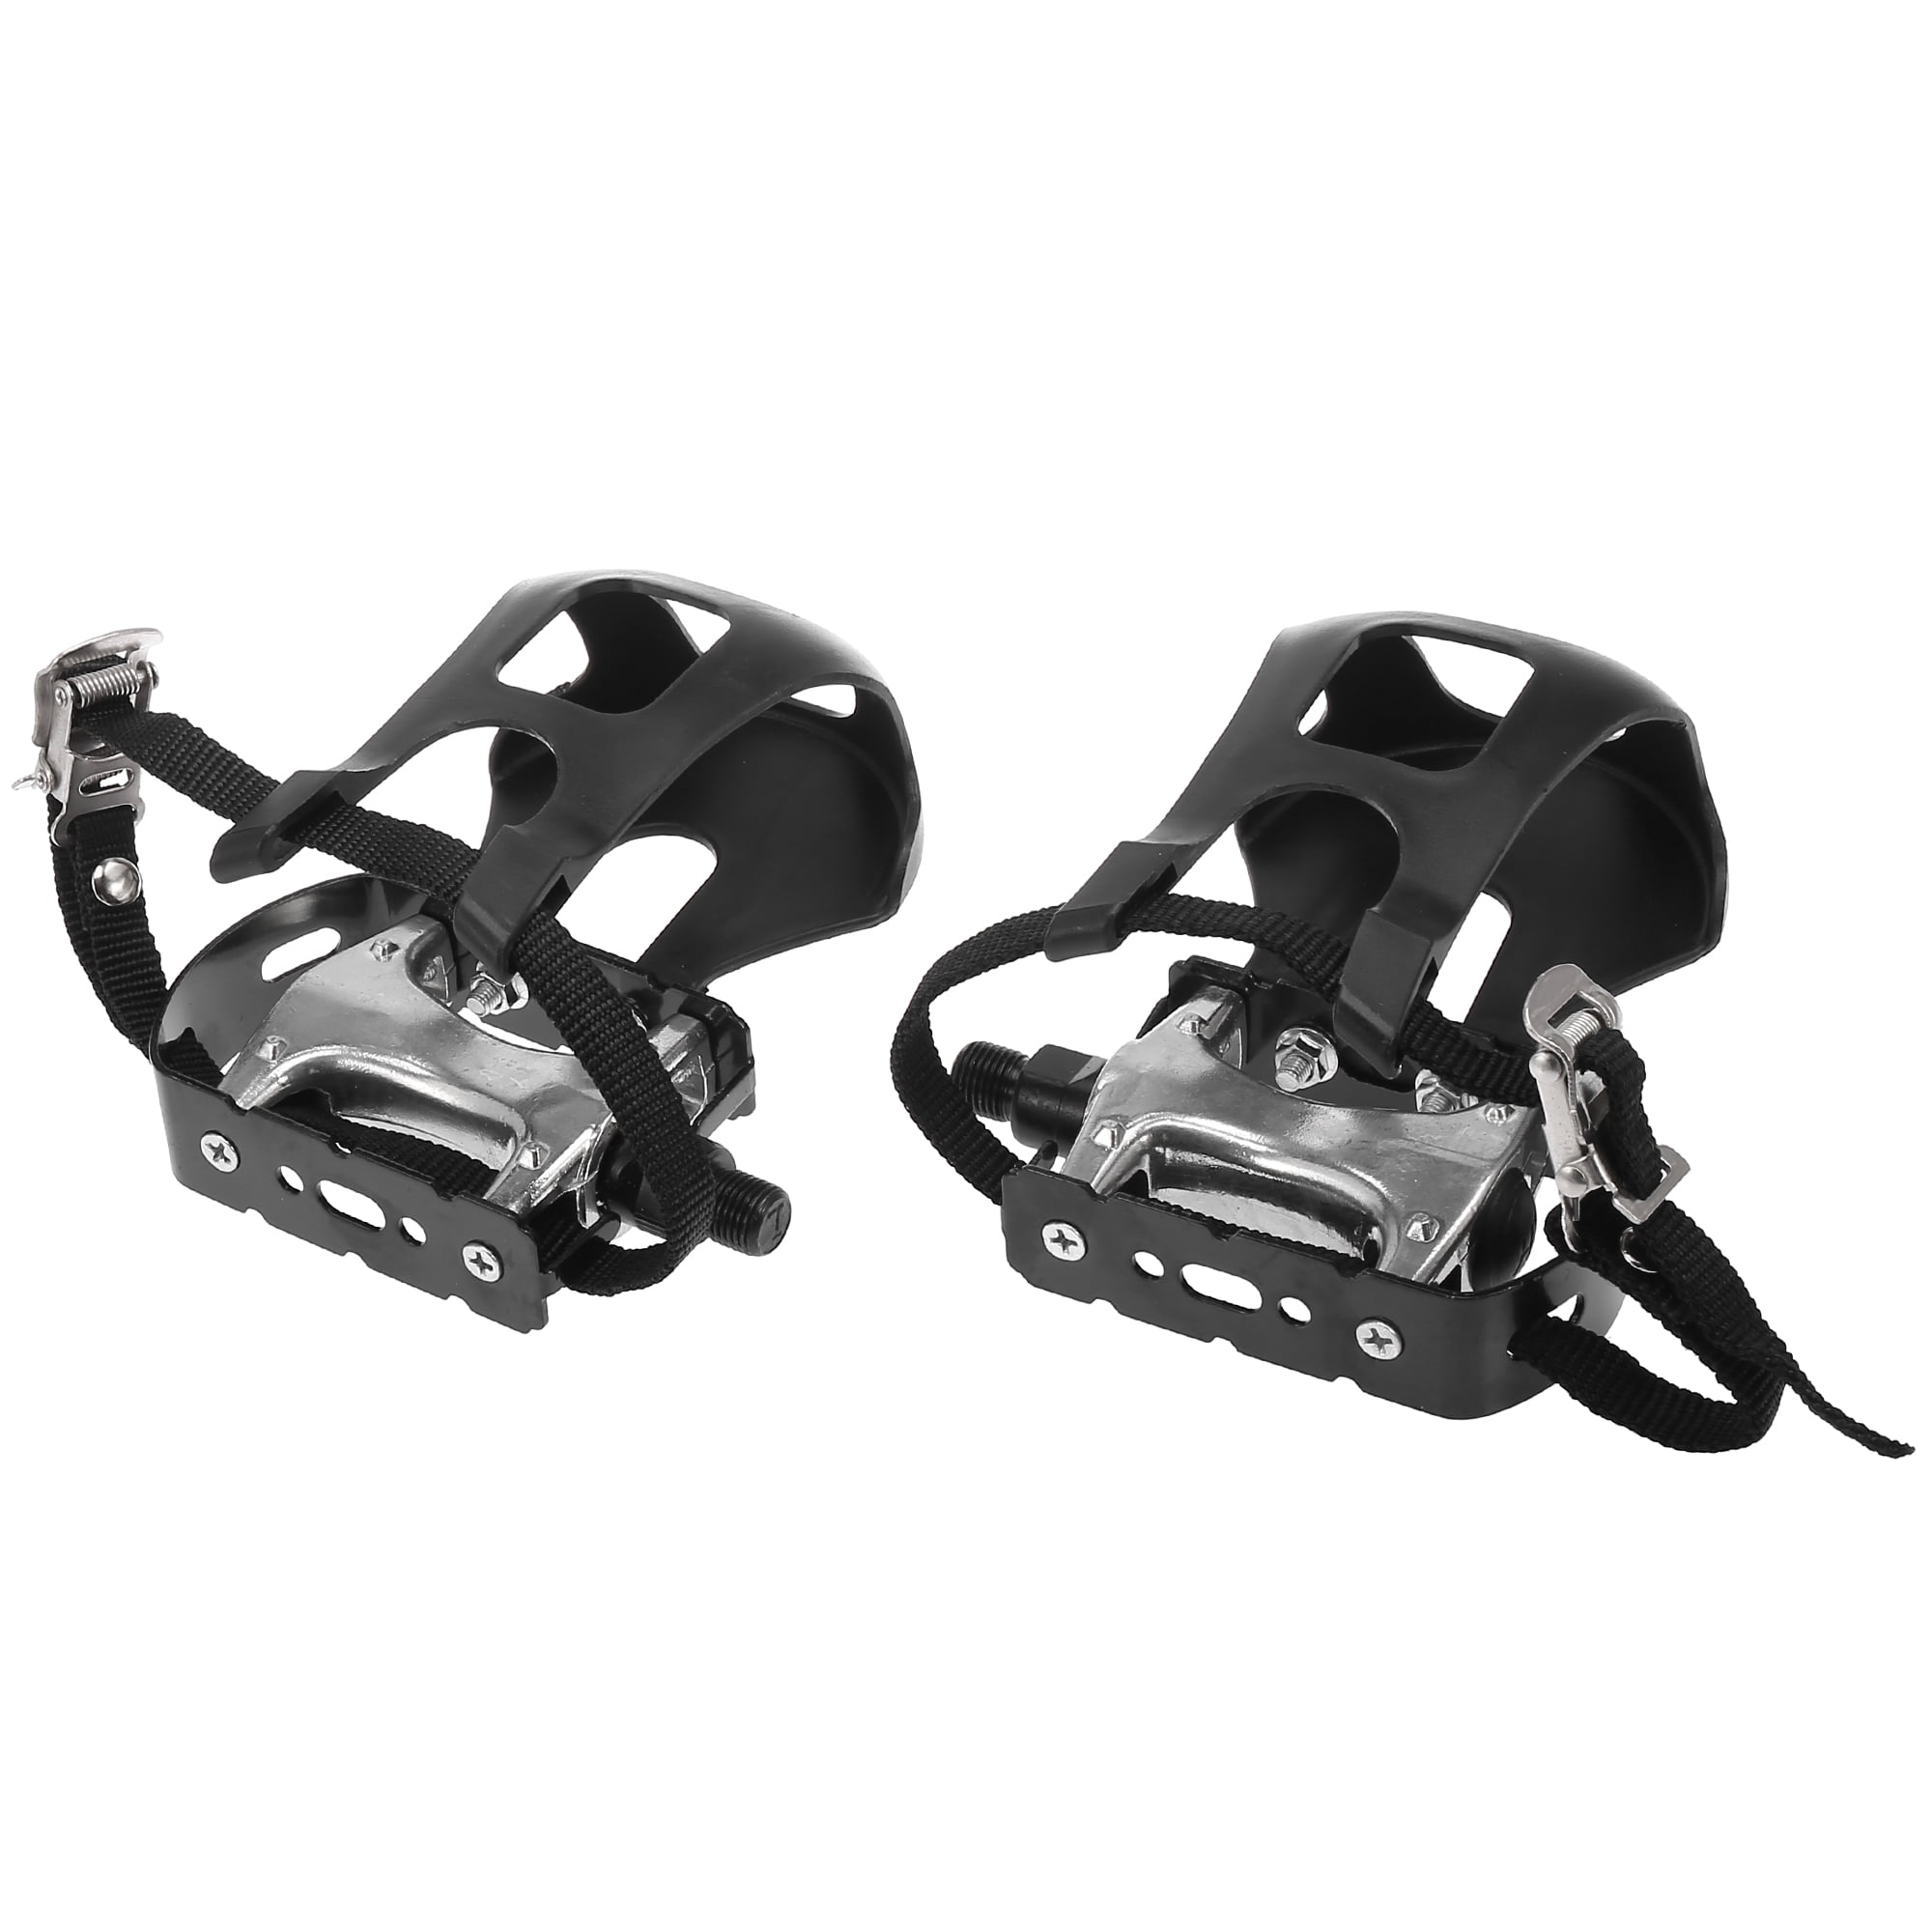 pushfocourag Outdoor Cycling Mountain Road Bike Bicycle Pedal Toe Clips with Straps Screws